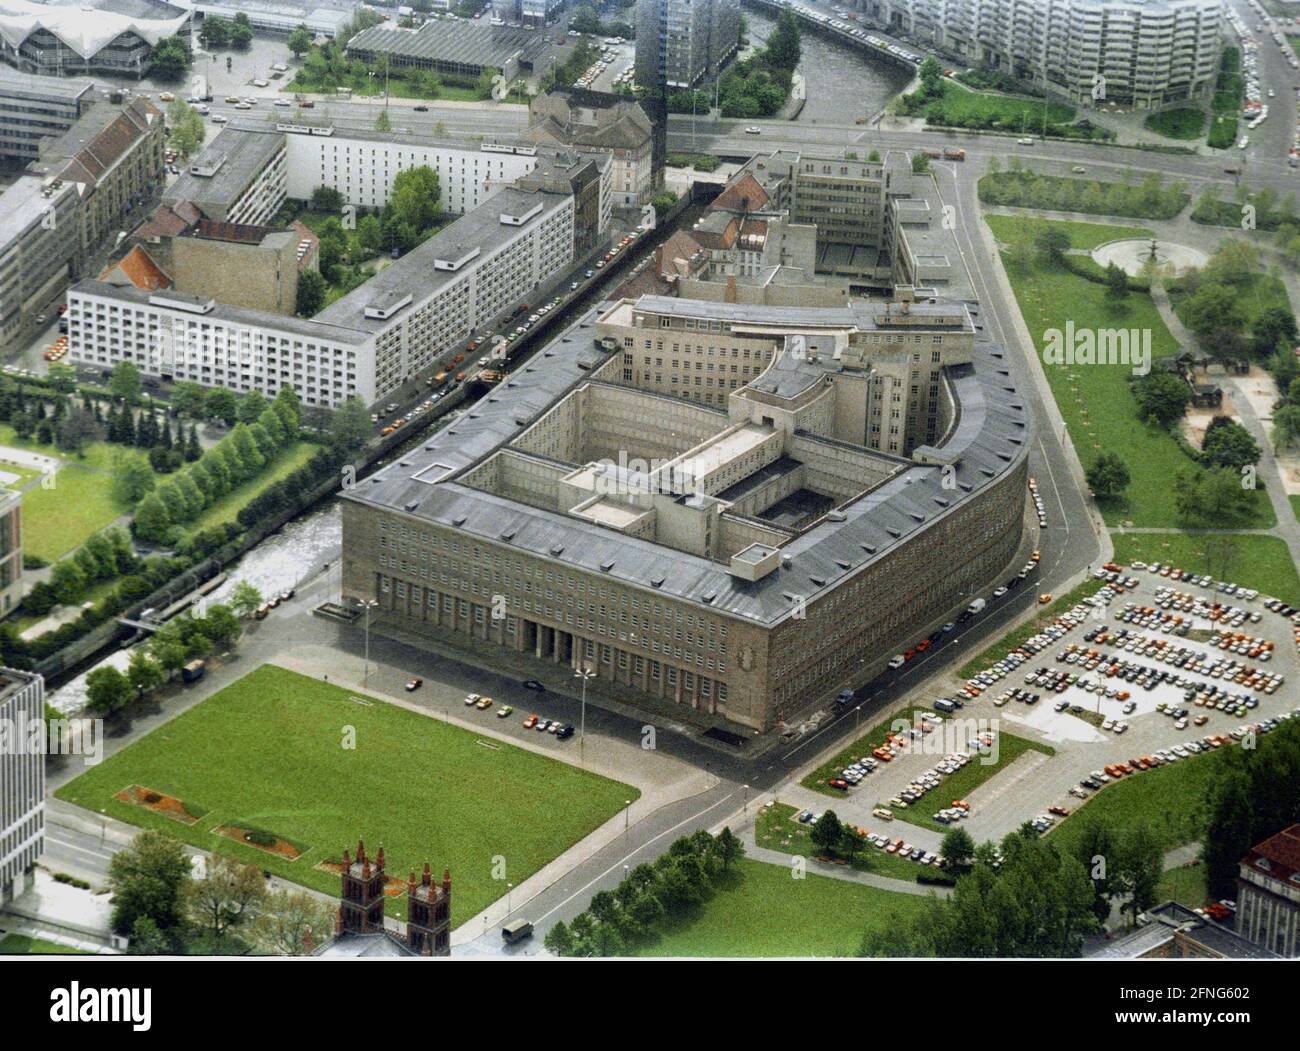 GDR / Berlin-City / 1991 The building of the Central Committee of the SED, formerly the German Reichsbank. From the rear part of the building the exchange of GDR marks into DM is organized. Today it houses the Federal Ministry of Foreign Affairs (Auswaertiges Amt), the lawn in front of the building has been redeveloped. In 1990, the freely-elected GDR People's Chamber met here and decided to join the Federal Republic. The Palace of the Republic was closed due to asbestos. // Government district / Berlin-Mitte / aerial view / [automated translation] Stock Photo